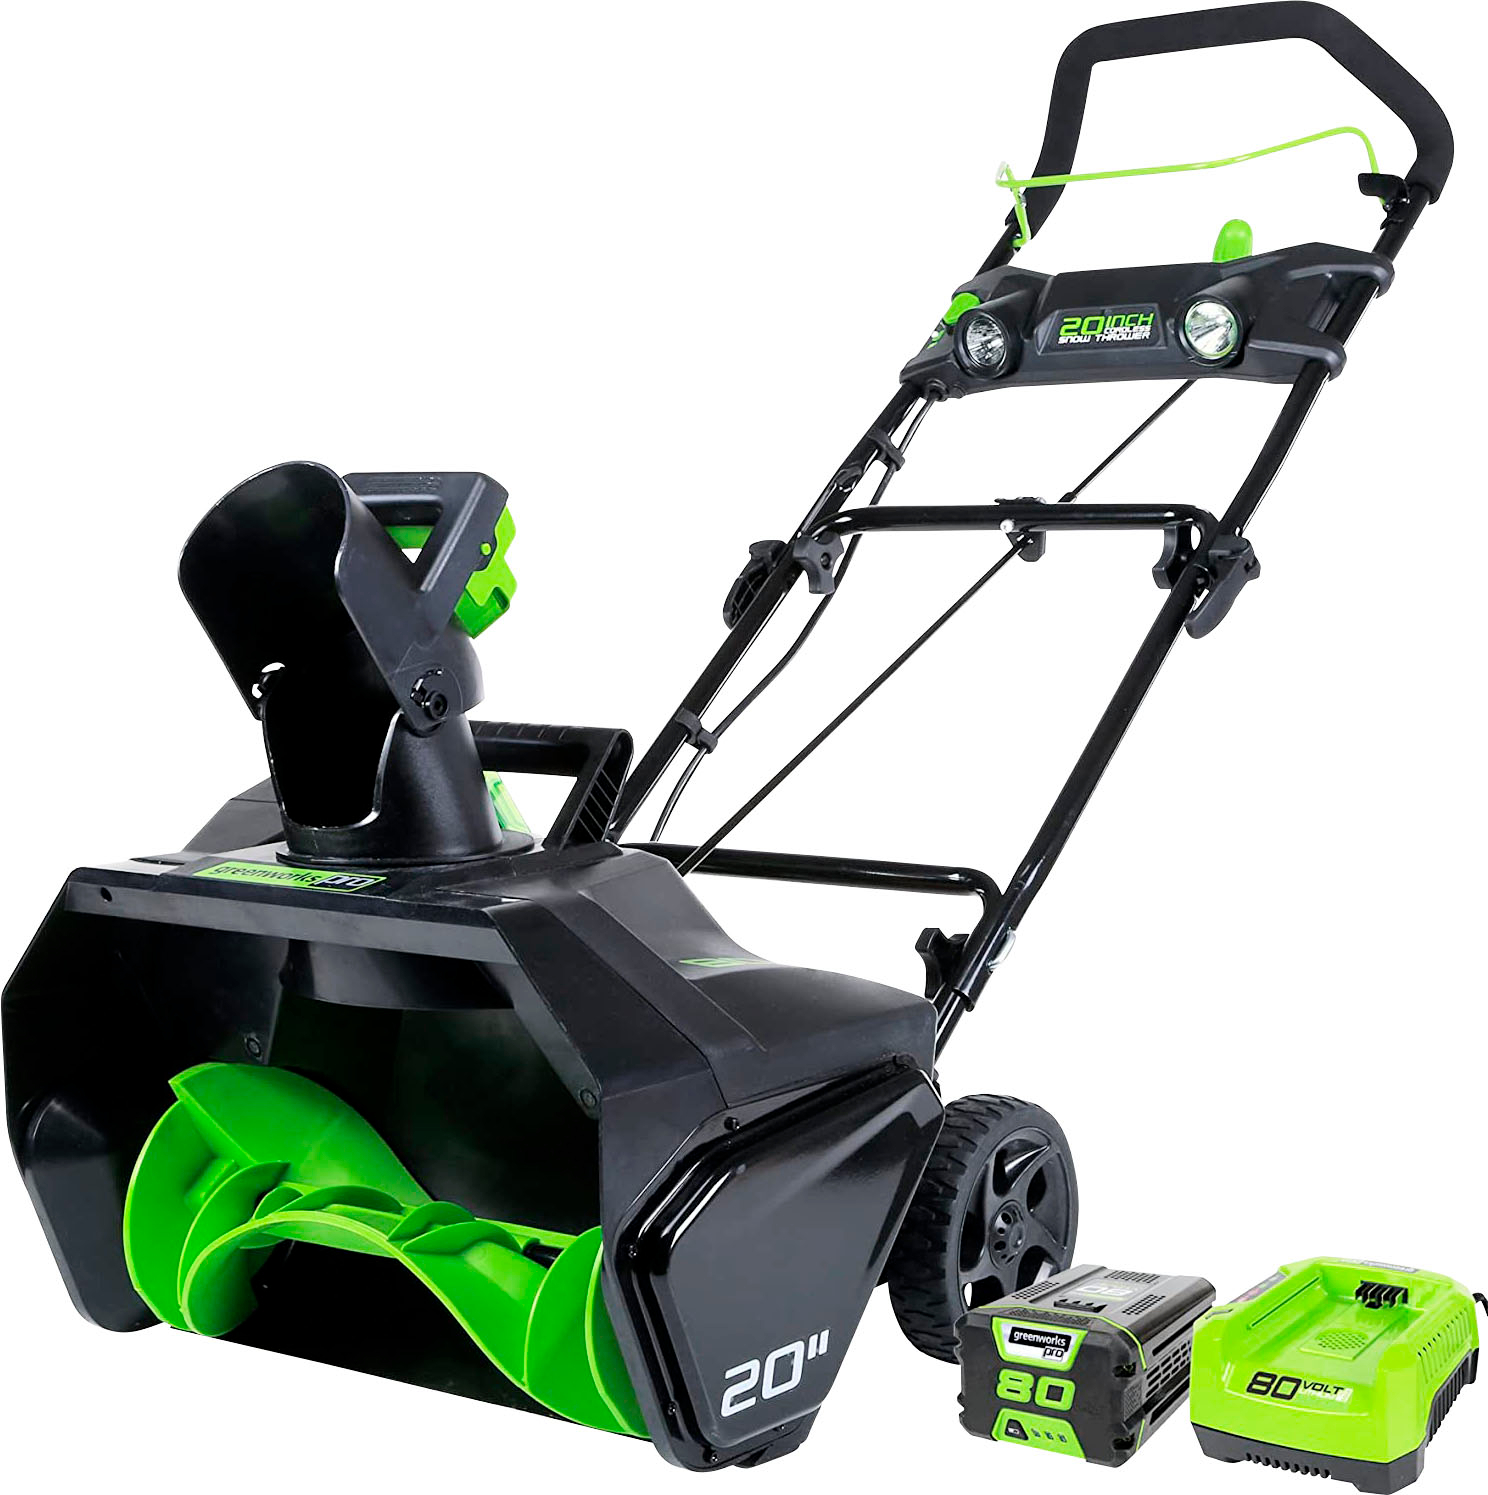 Greenworks 80V 20” Brushless Pole Hedge Trimmer with 2.0 Ah Battery and  Charger Green 2305102 - Best Buy